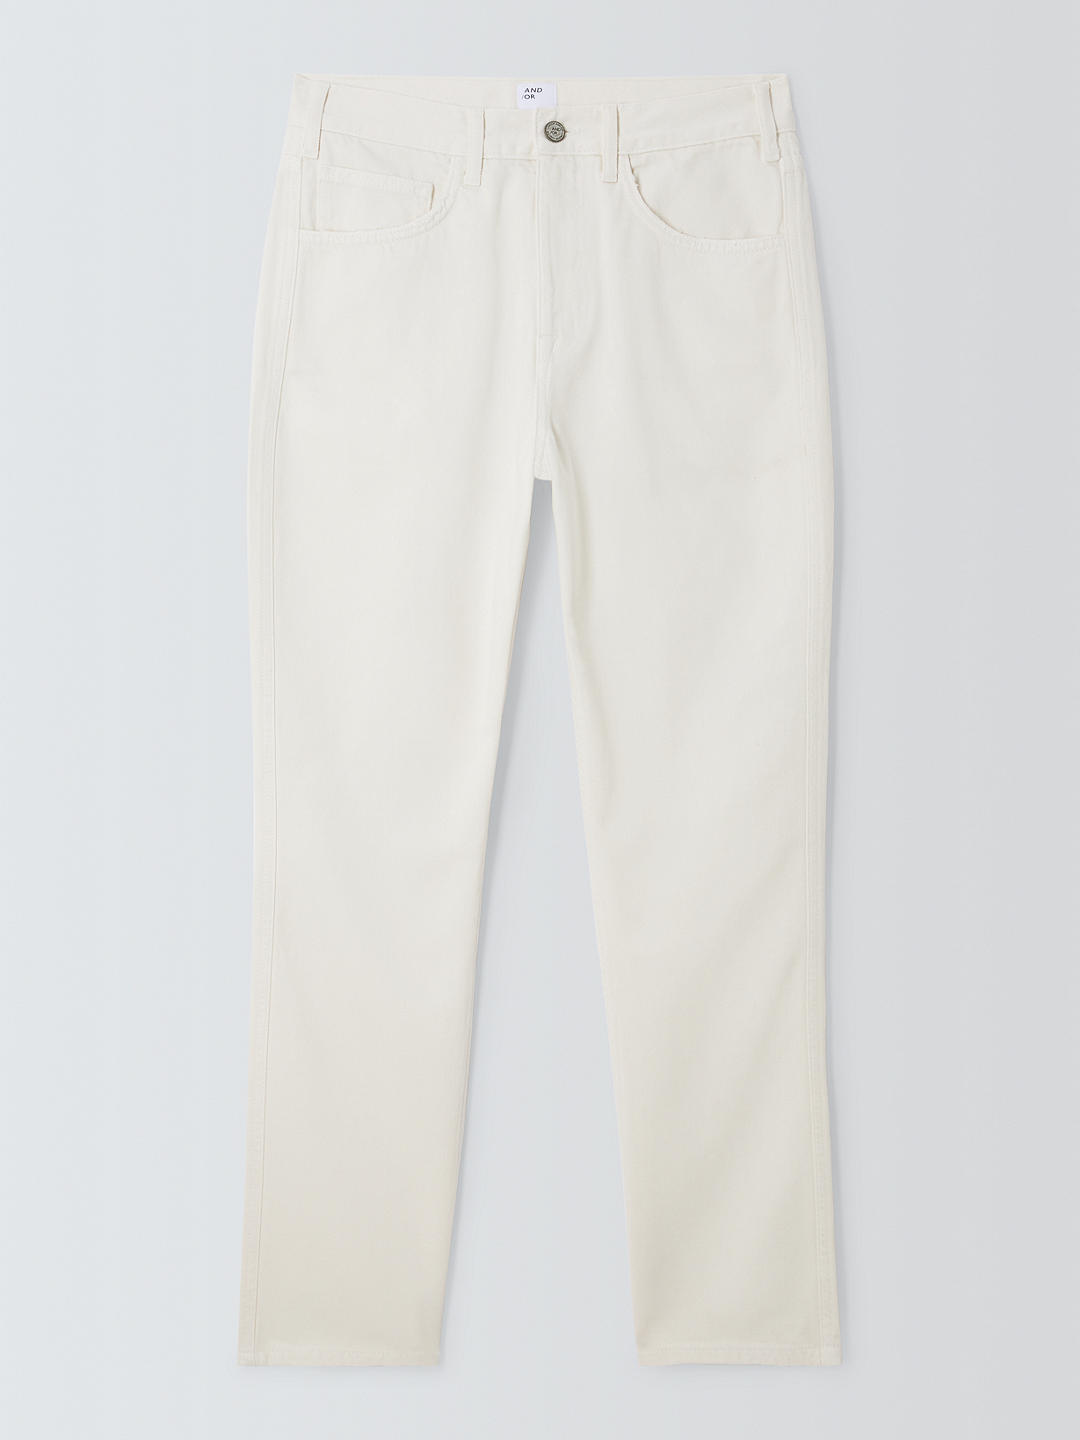 AND/OR Melrose Organic Cotton Straight Cut Jeans, Soft White